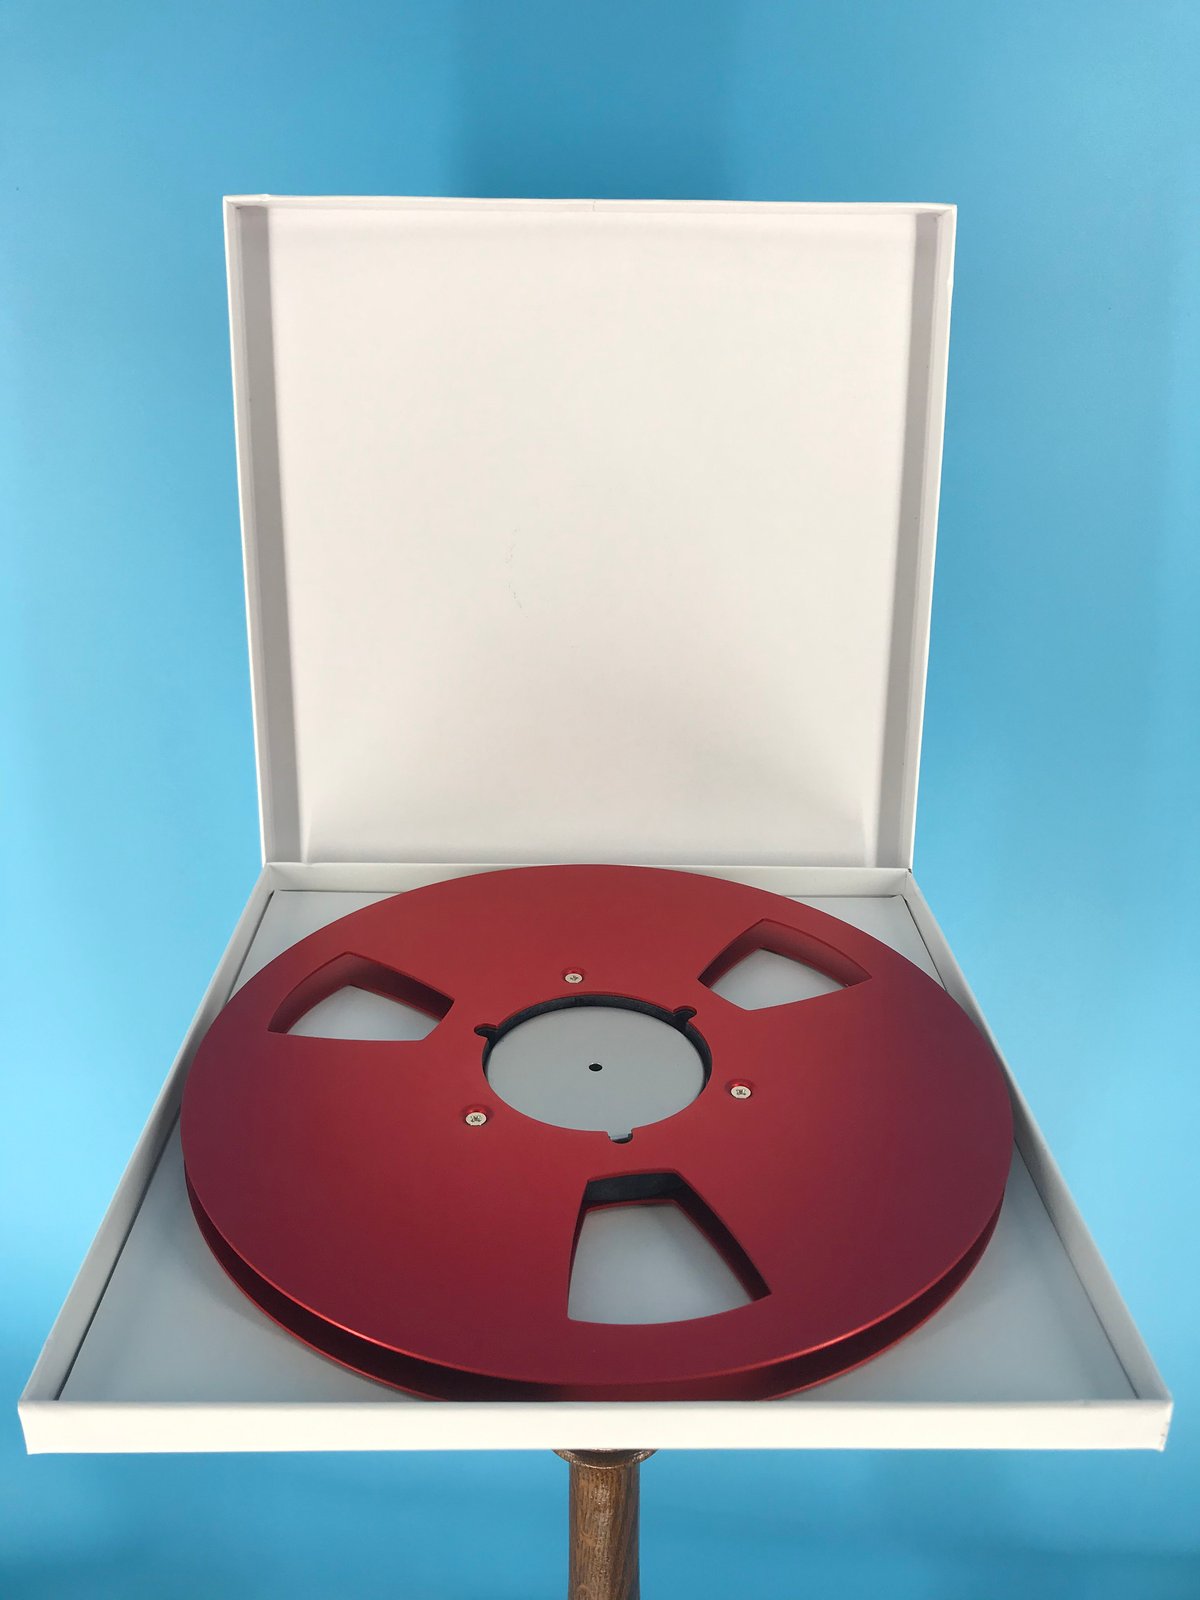 RED Akai NAB 10.5" inch Metal Reel for 1/4" tape New 